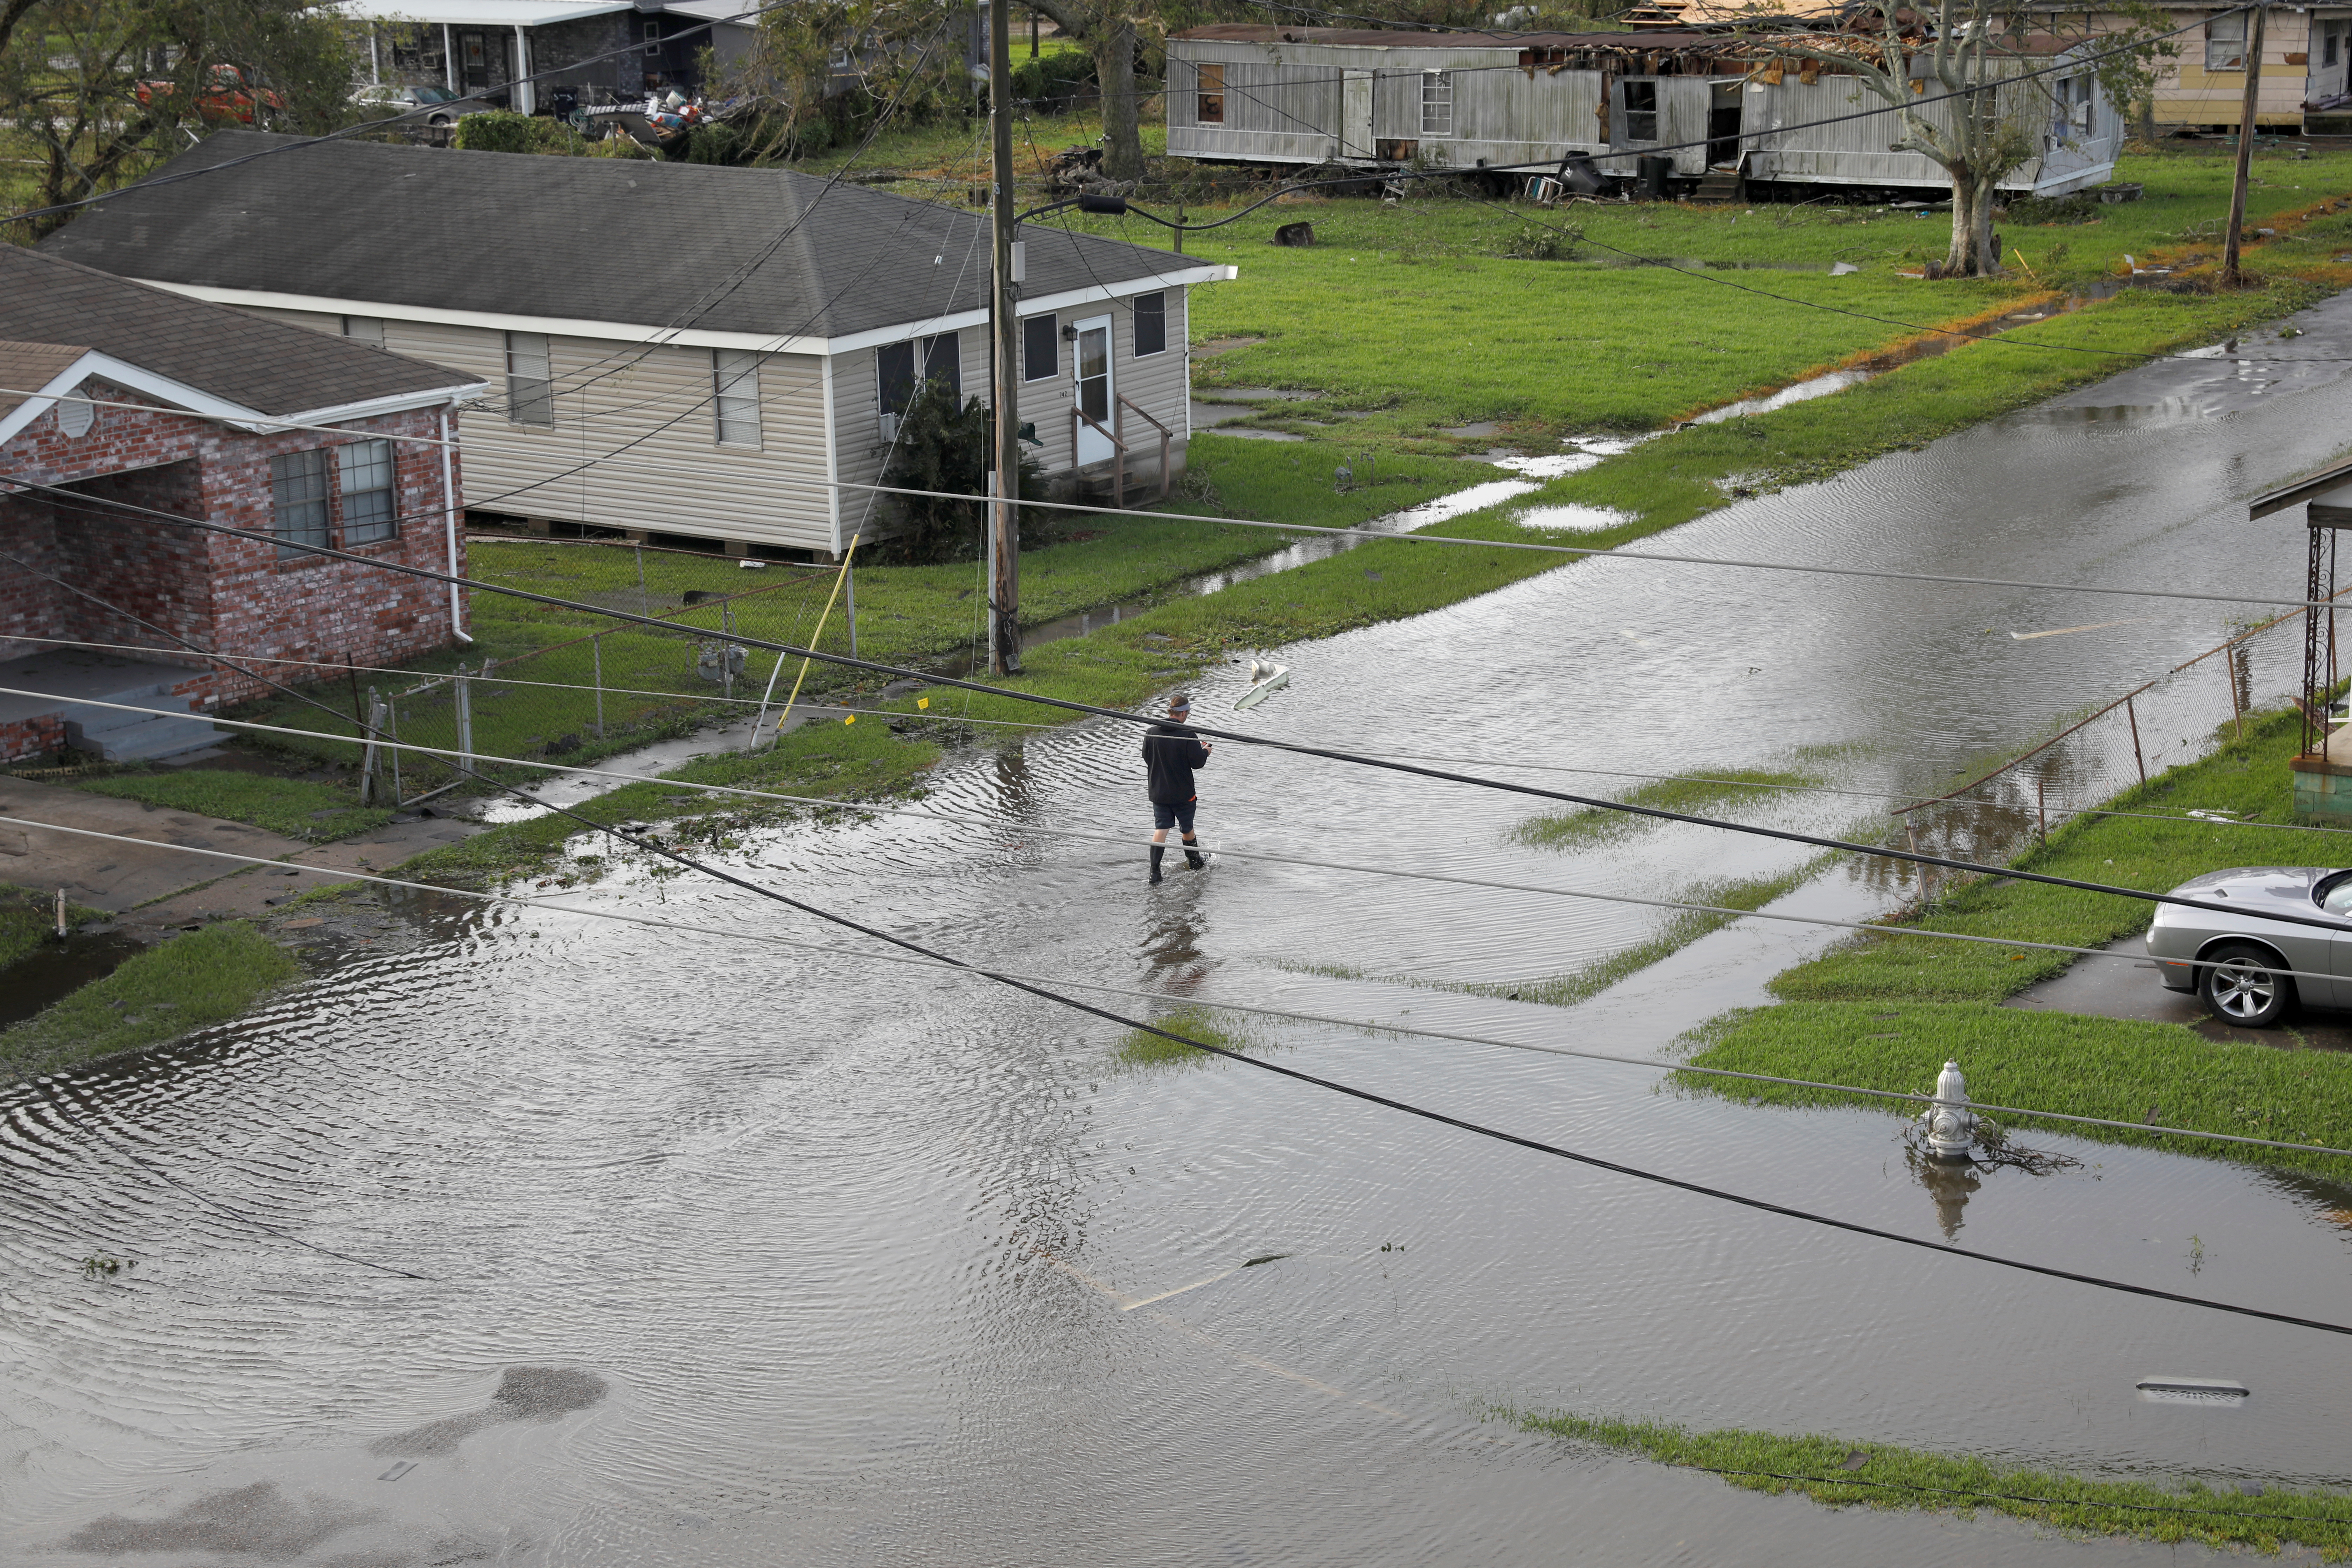 A person walks in a flooded street after Hurricane Ida made landfall in Louisiana, in Kenner, Louisiana, U.S. August 30, 2021. REUTERS/Marco Bello